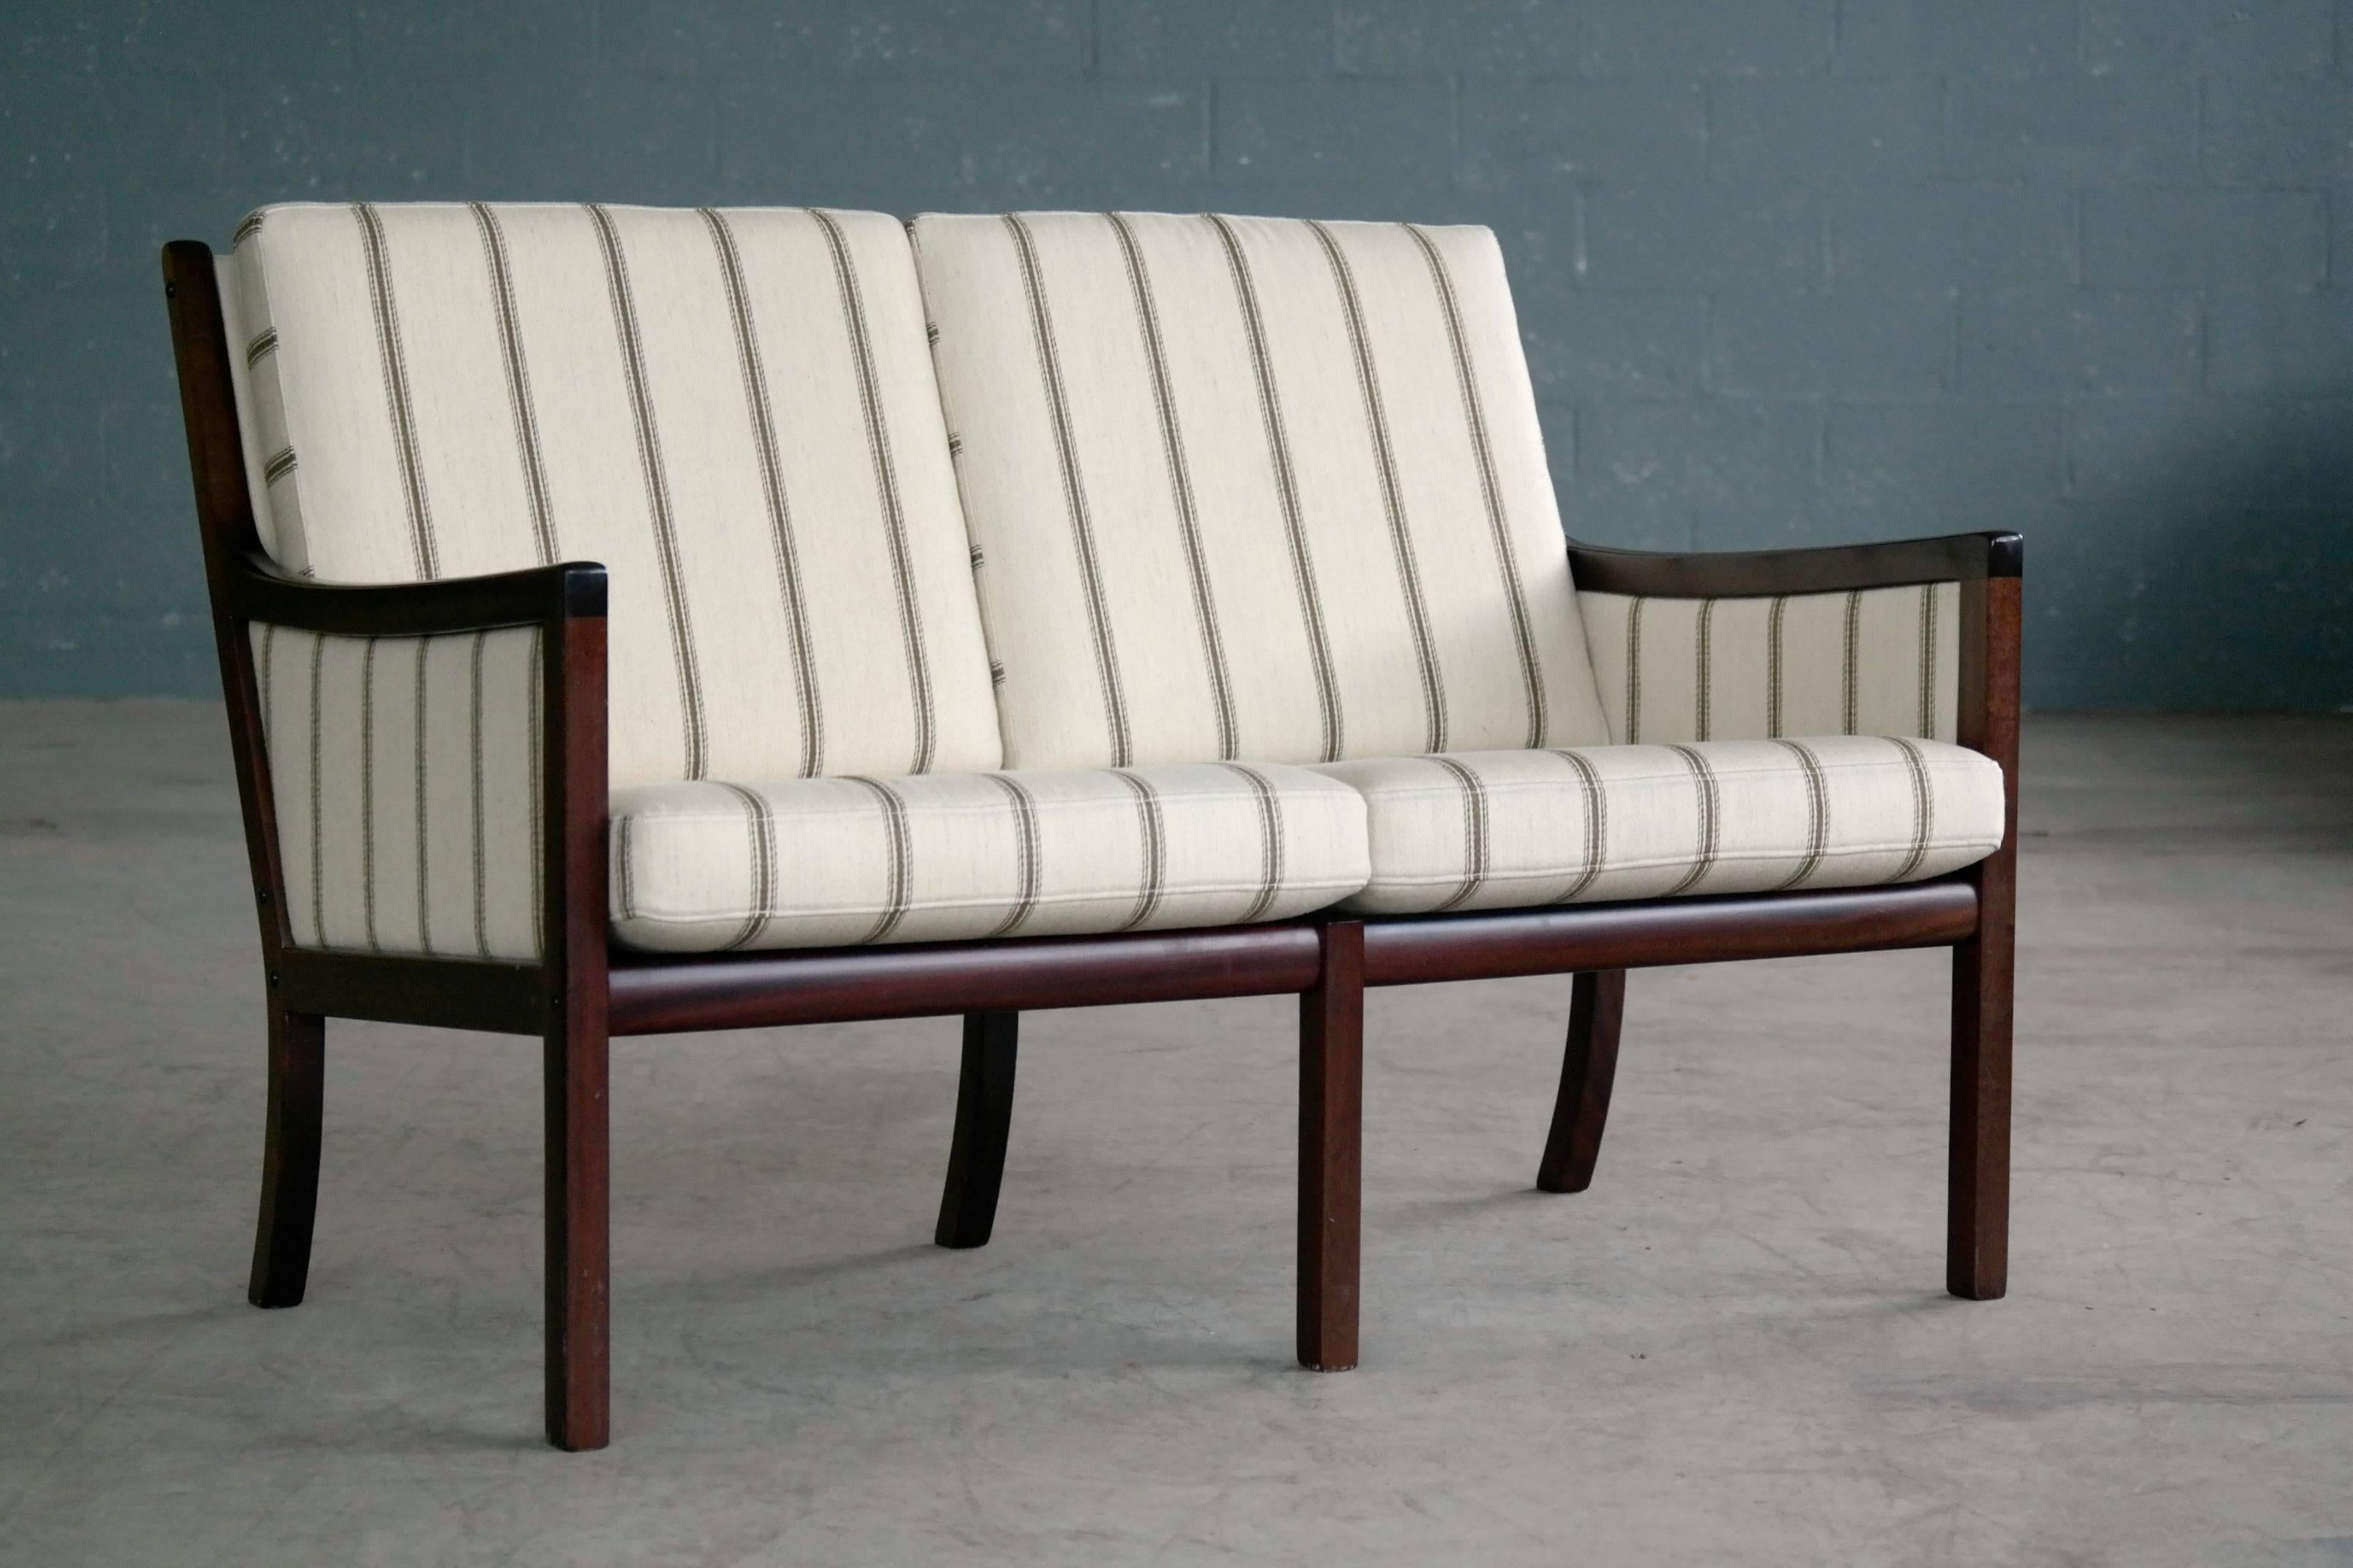 Classic and very elegant settee by Ole Wanscher designed in the 1950s and produced by P. Jeppesen Møbelfabrik likely sometime, circa 1970. Made from lacquered solid mahogany and covered in the original white wool with dark stripes. Nice deep dark